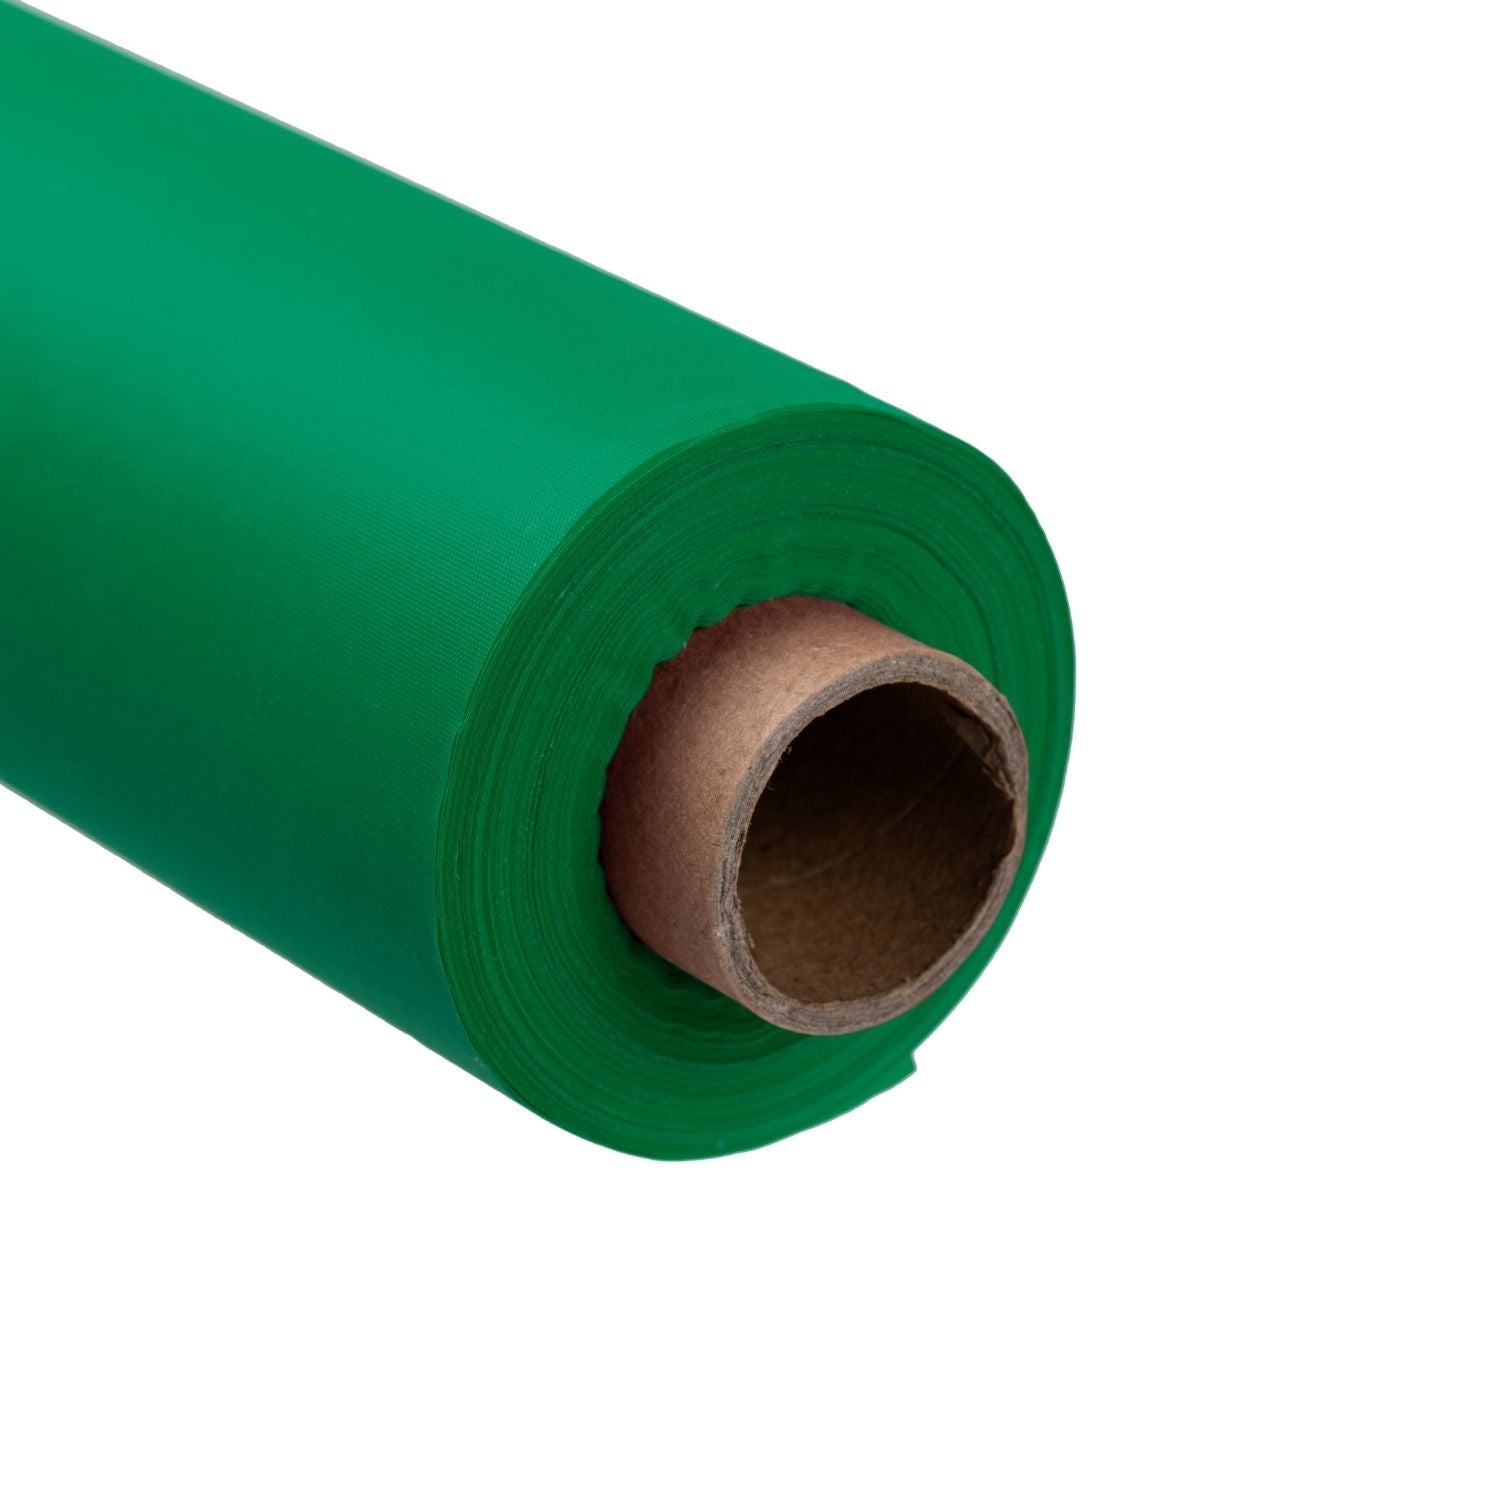 40 In. X 300 Ft. Premium Emerald Green Plastic Table Roll | 4 Pack